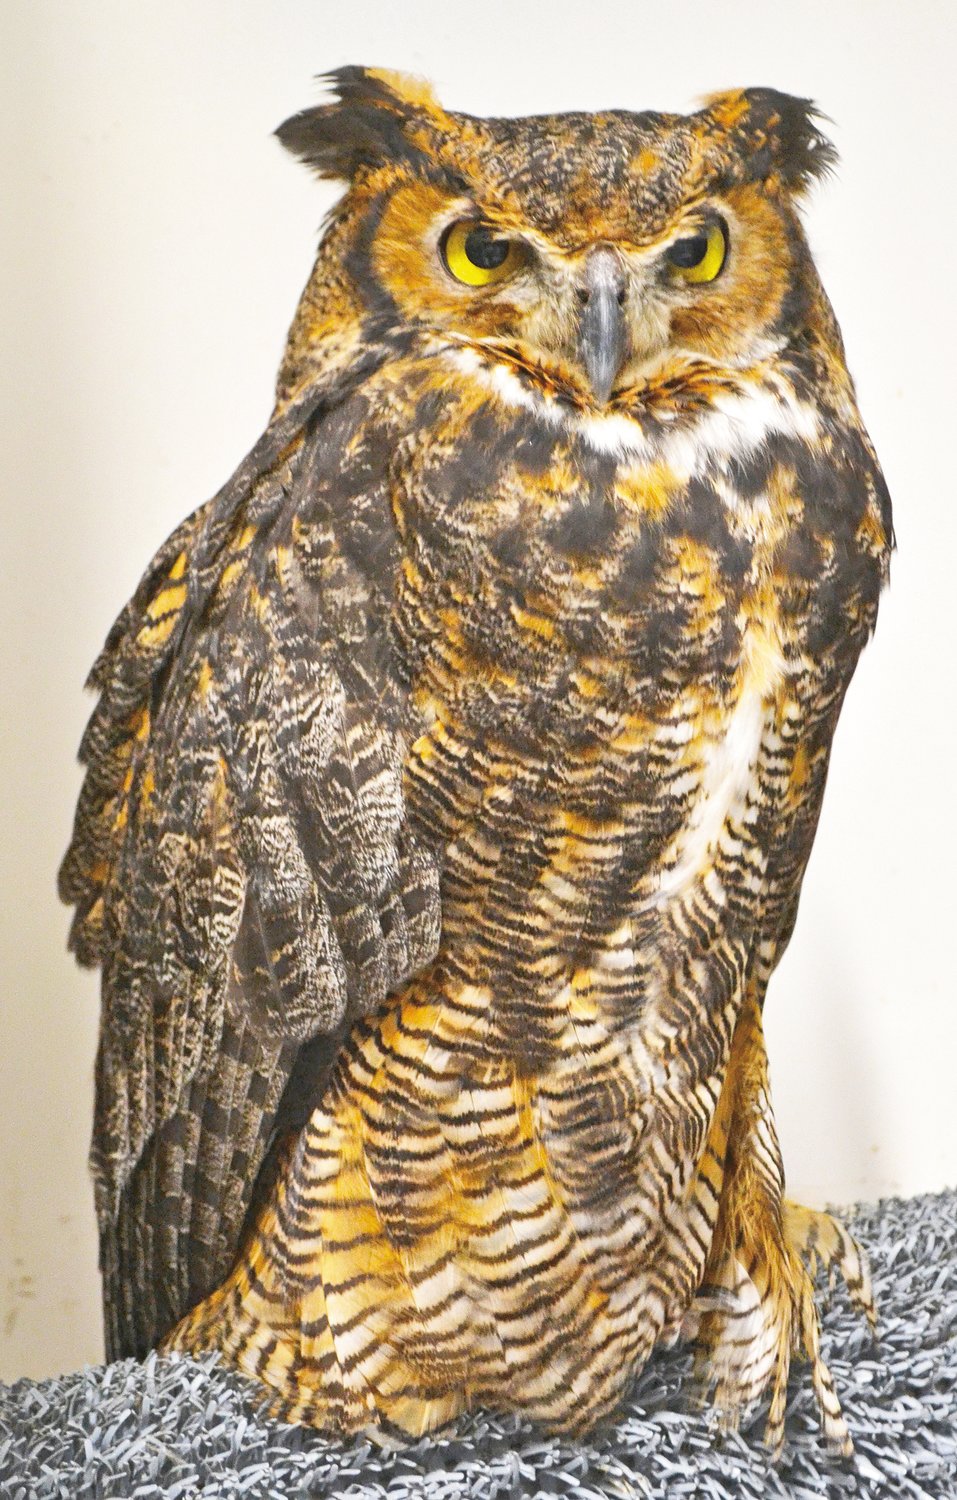 Starry, a 32-year-old great horned owl. Starry, non-releasable due to a severe neck injury, helps raise baby owls that are brought into Wildside.